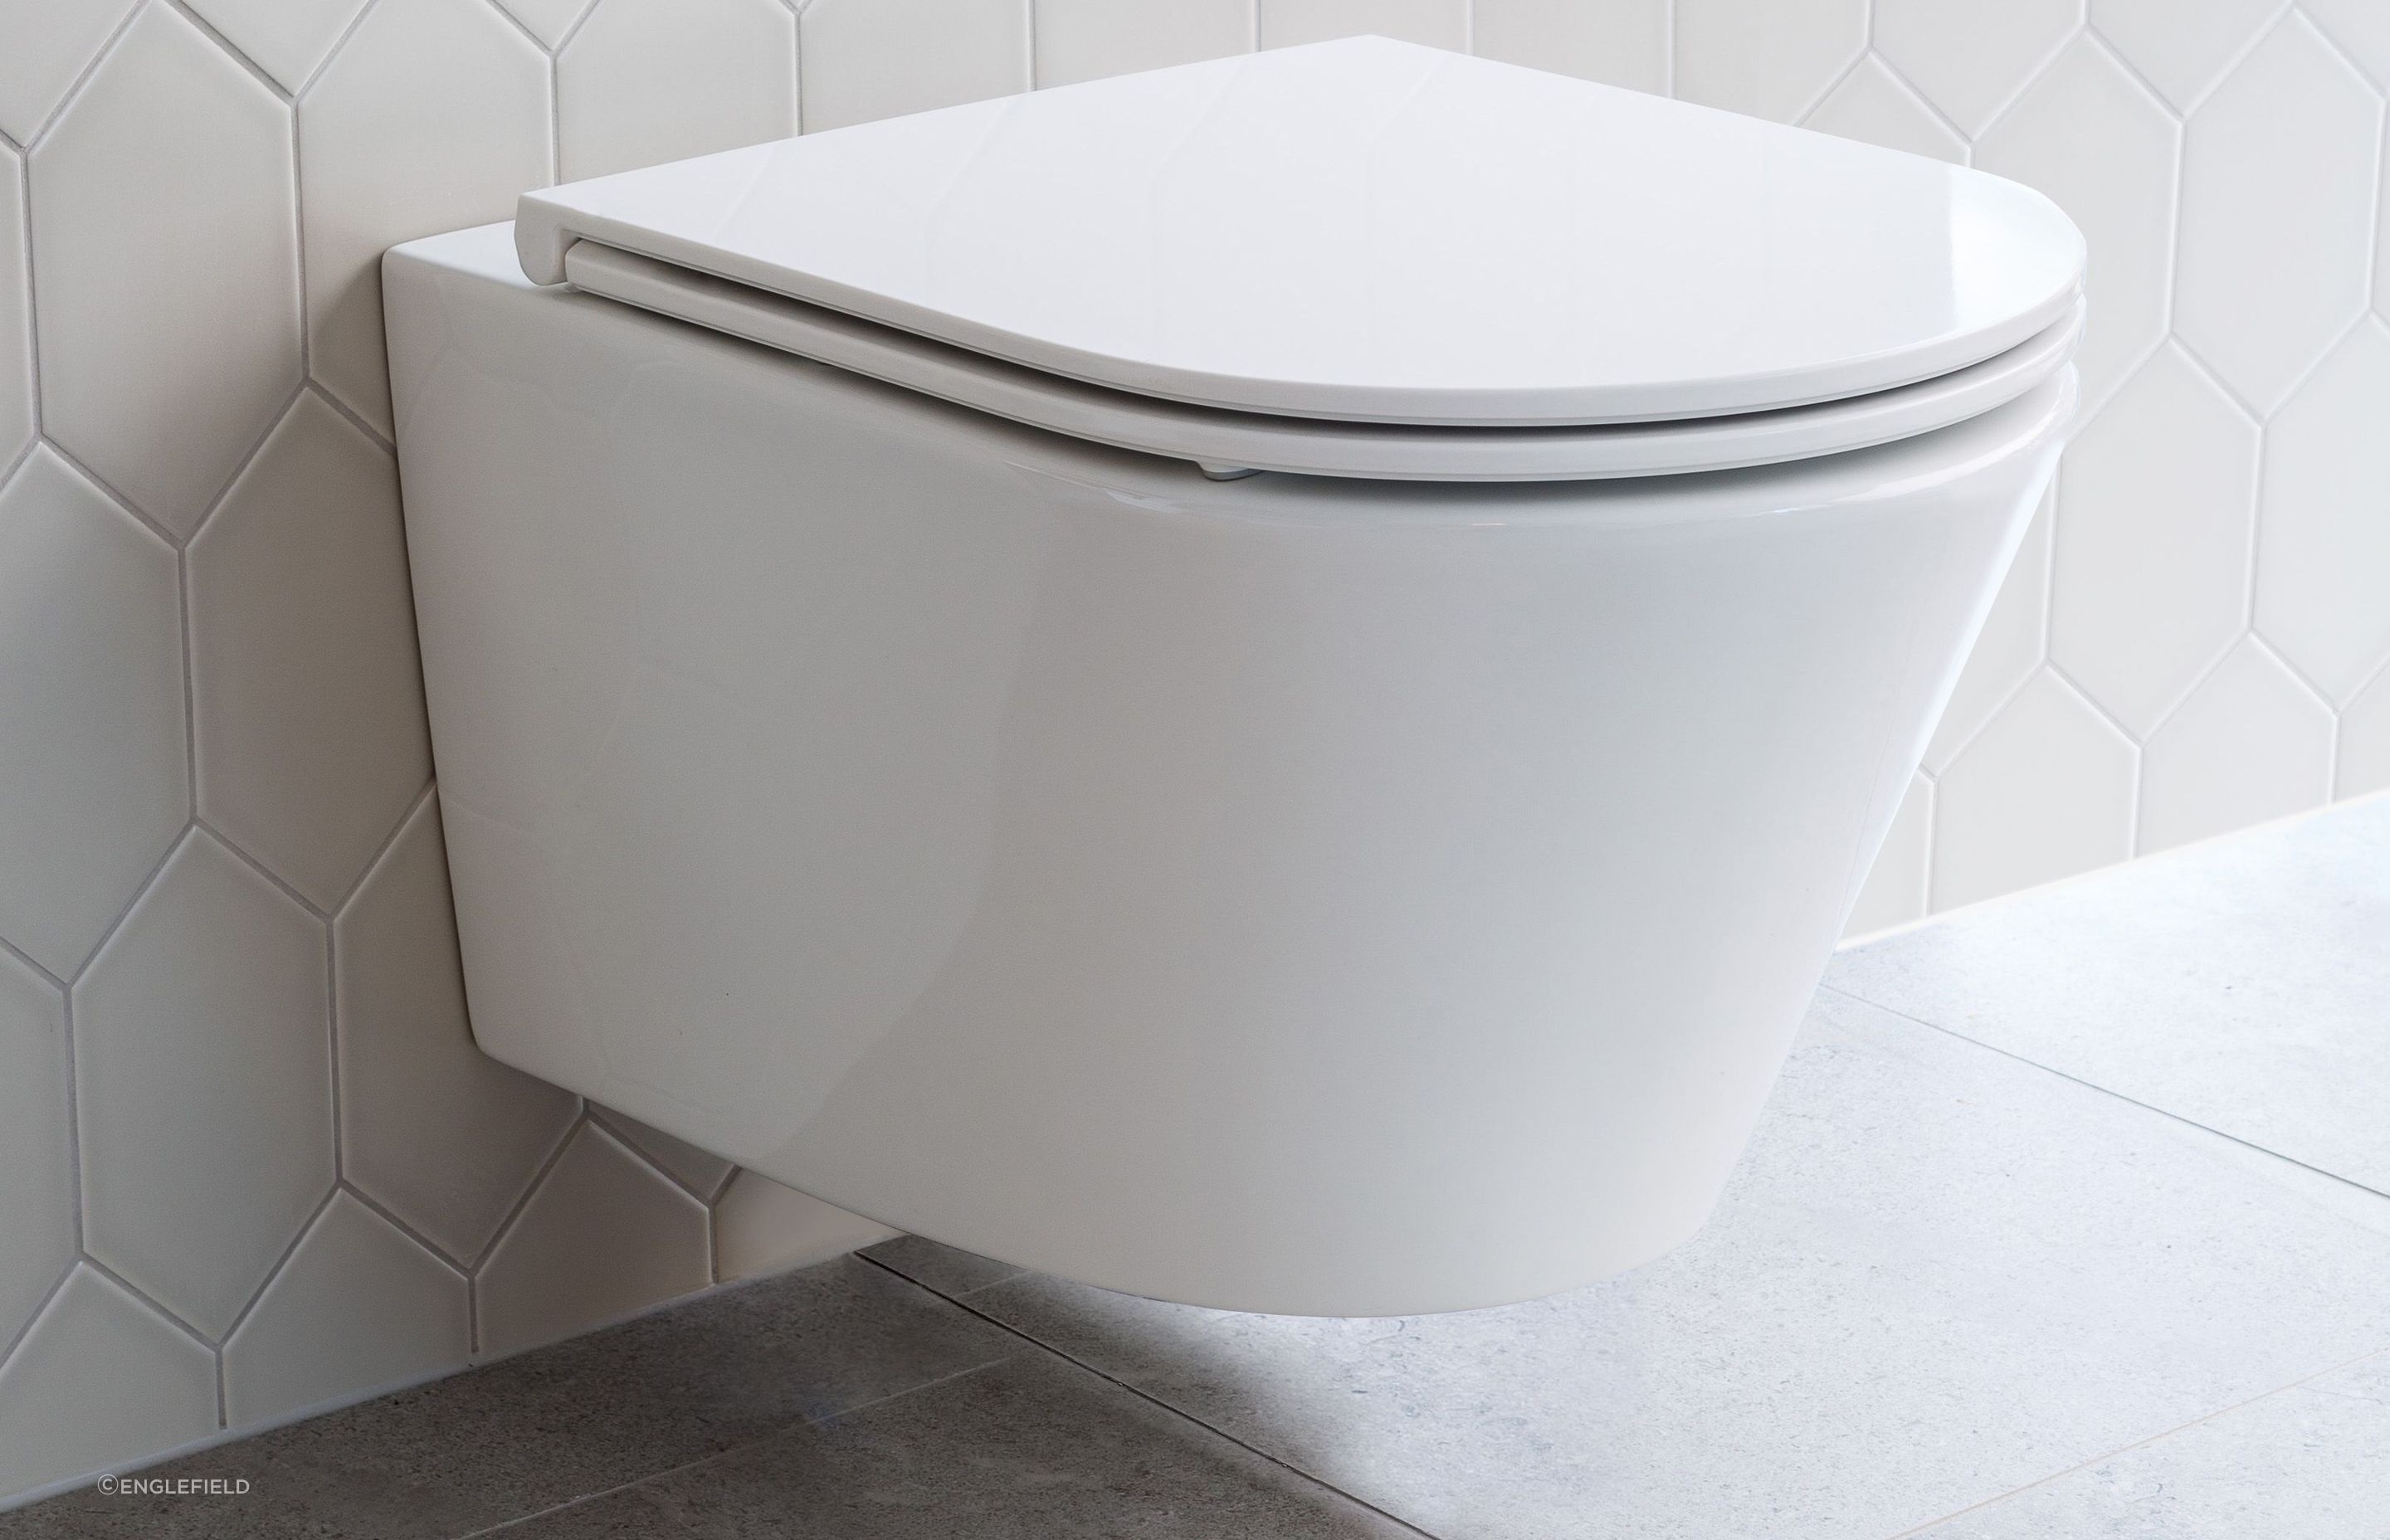 The top of the line Evora Wall Hung Toilet made with white vitreous china